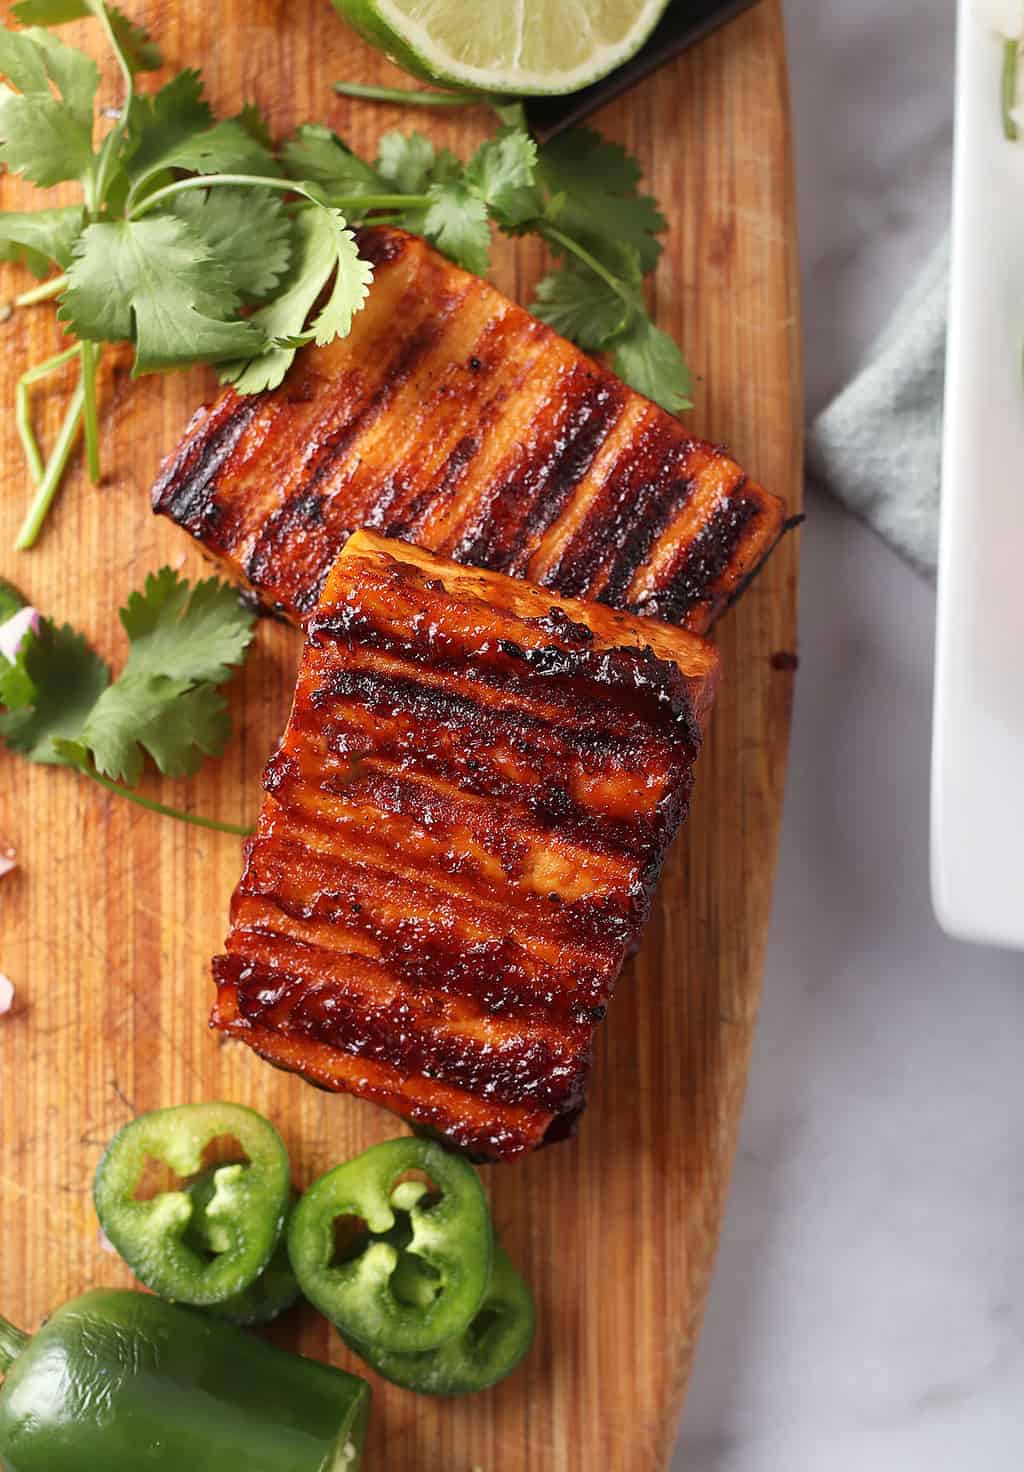 Grilled tofu steaks on wooden cutting board